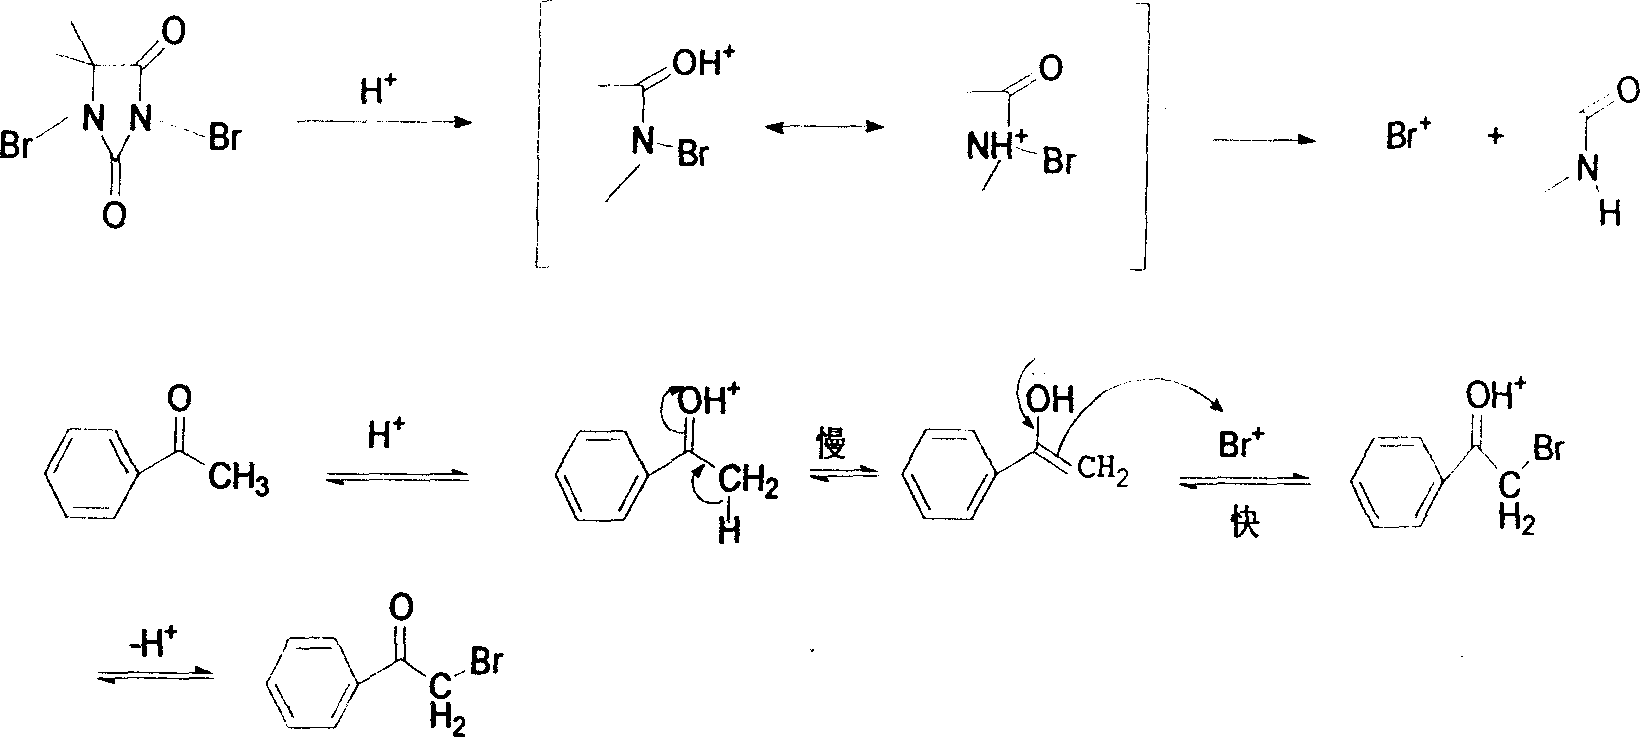 Method for synthesizing alpha-bromo-acetophenone